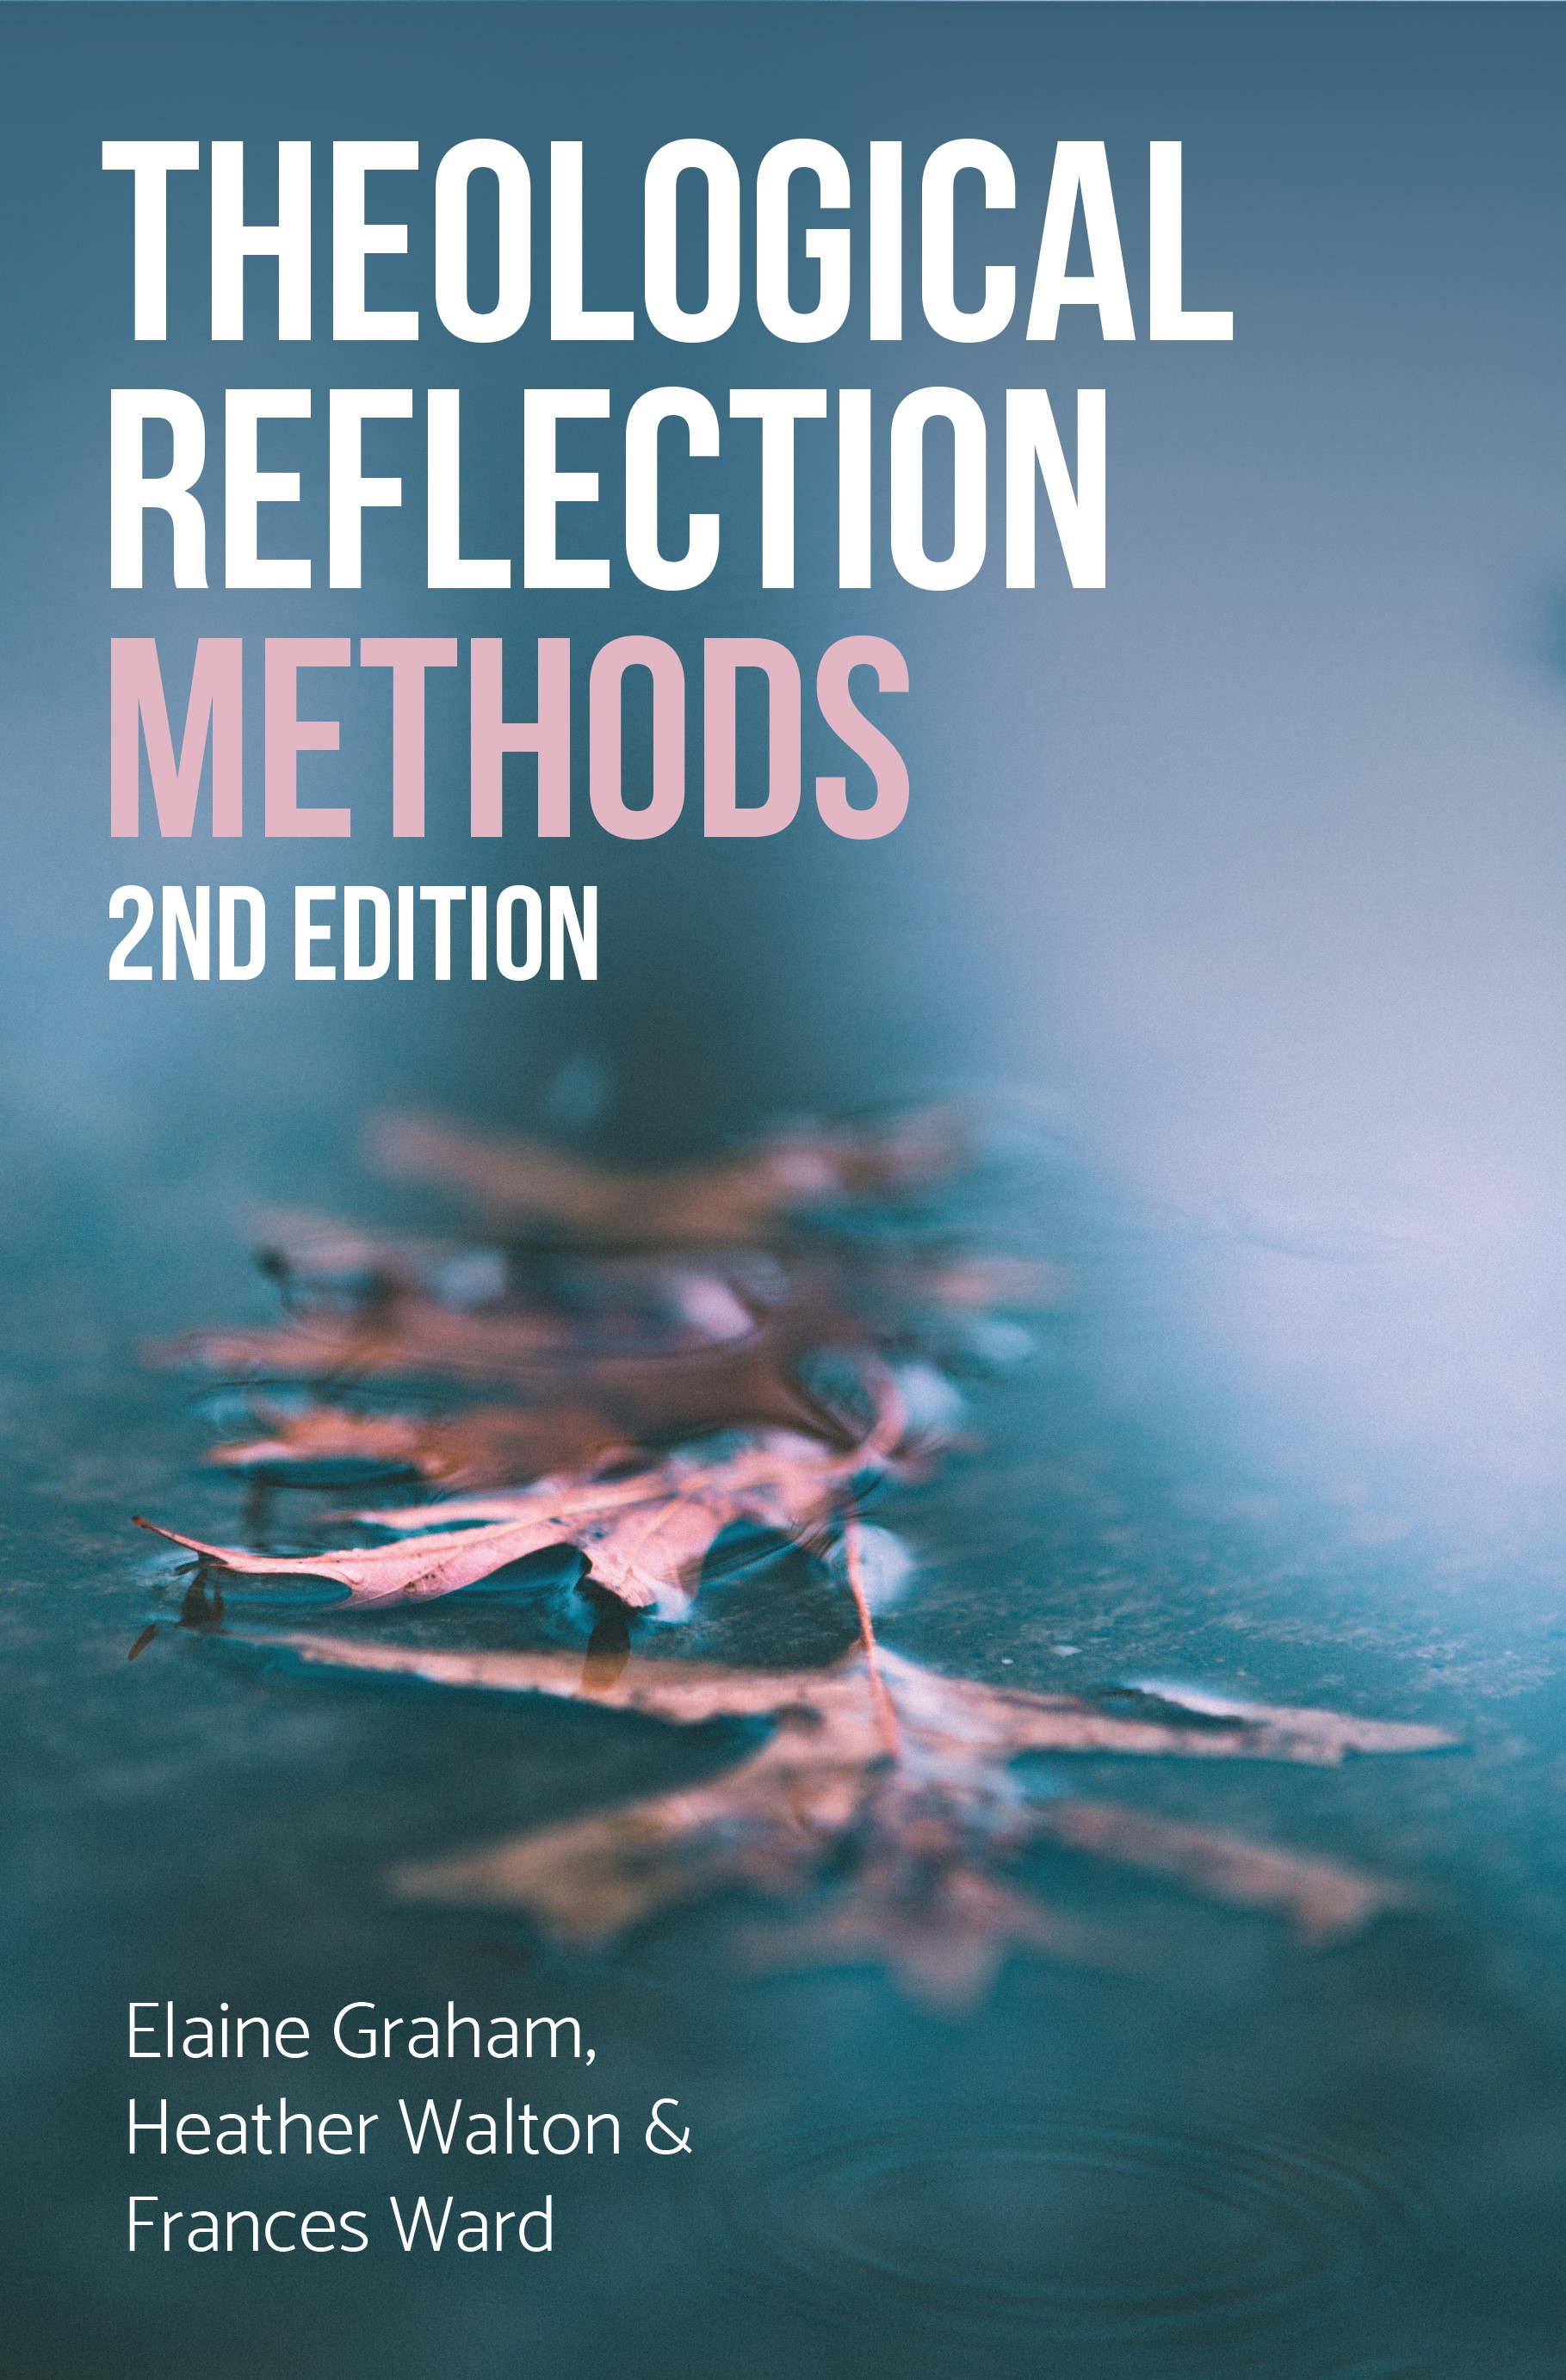 Theological Reflection Methods 2nd Edition (Paperback) 9780334056119